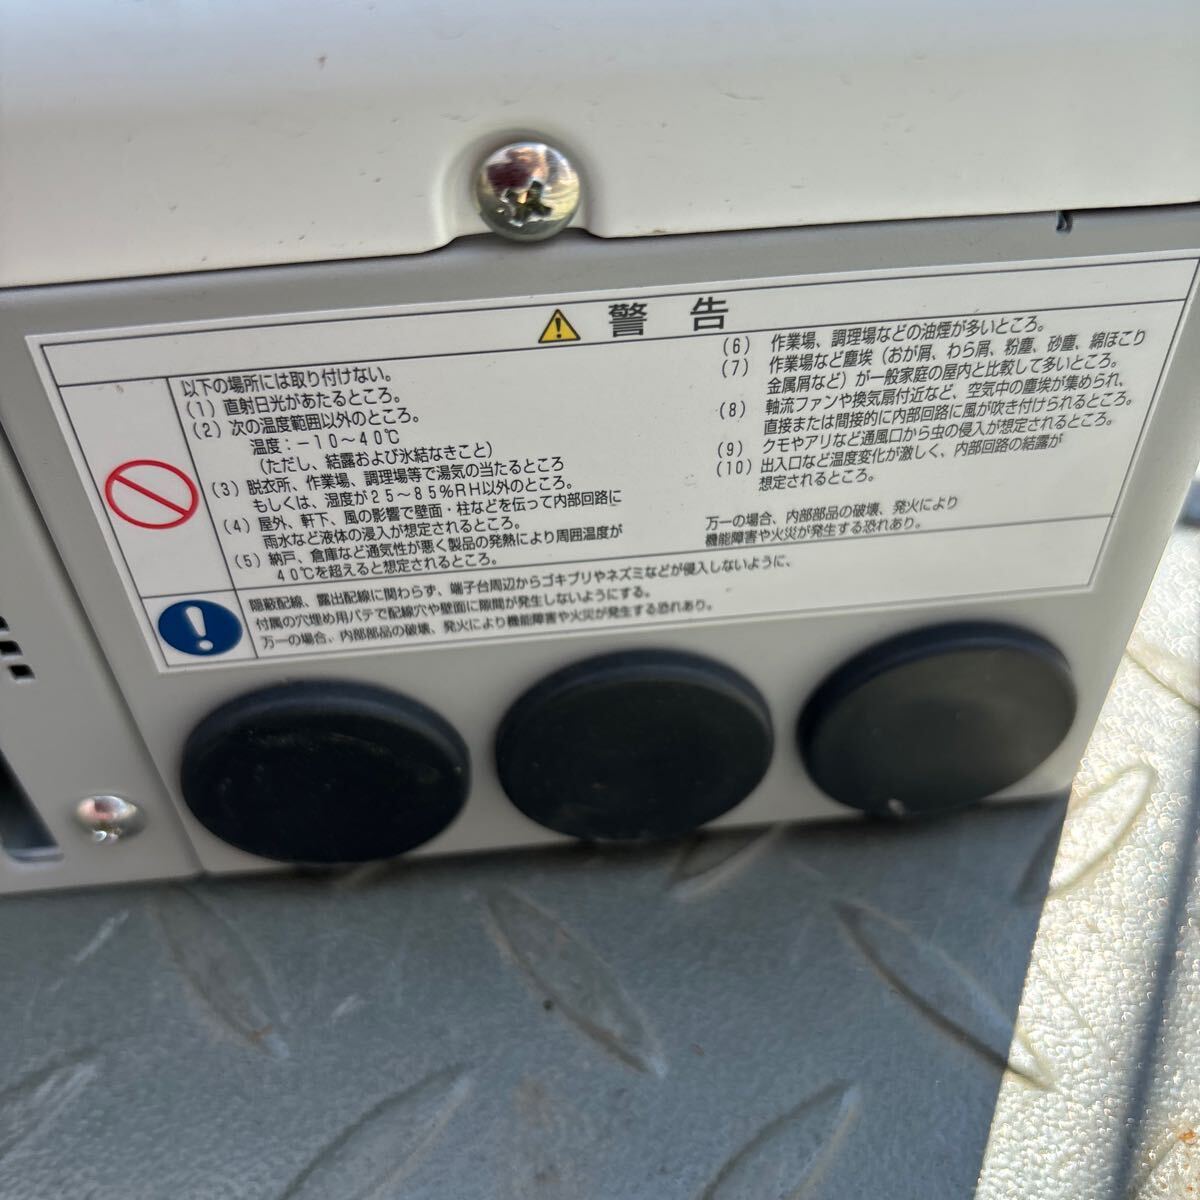 XYK7130OMRON power conditioner KP40K2 Omron 4.0kw operation not yet verification junk treatment 